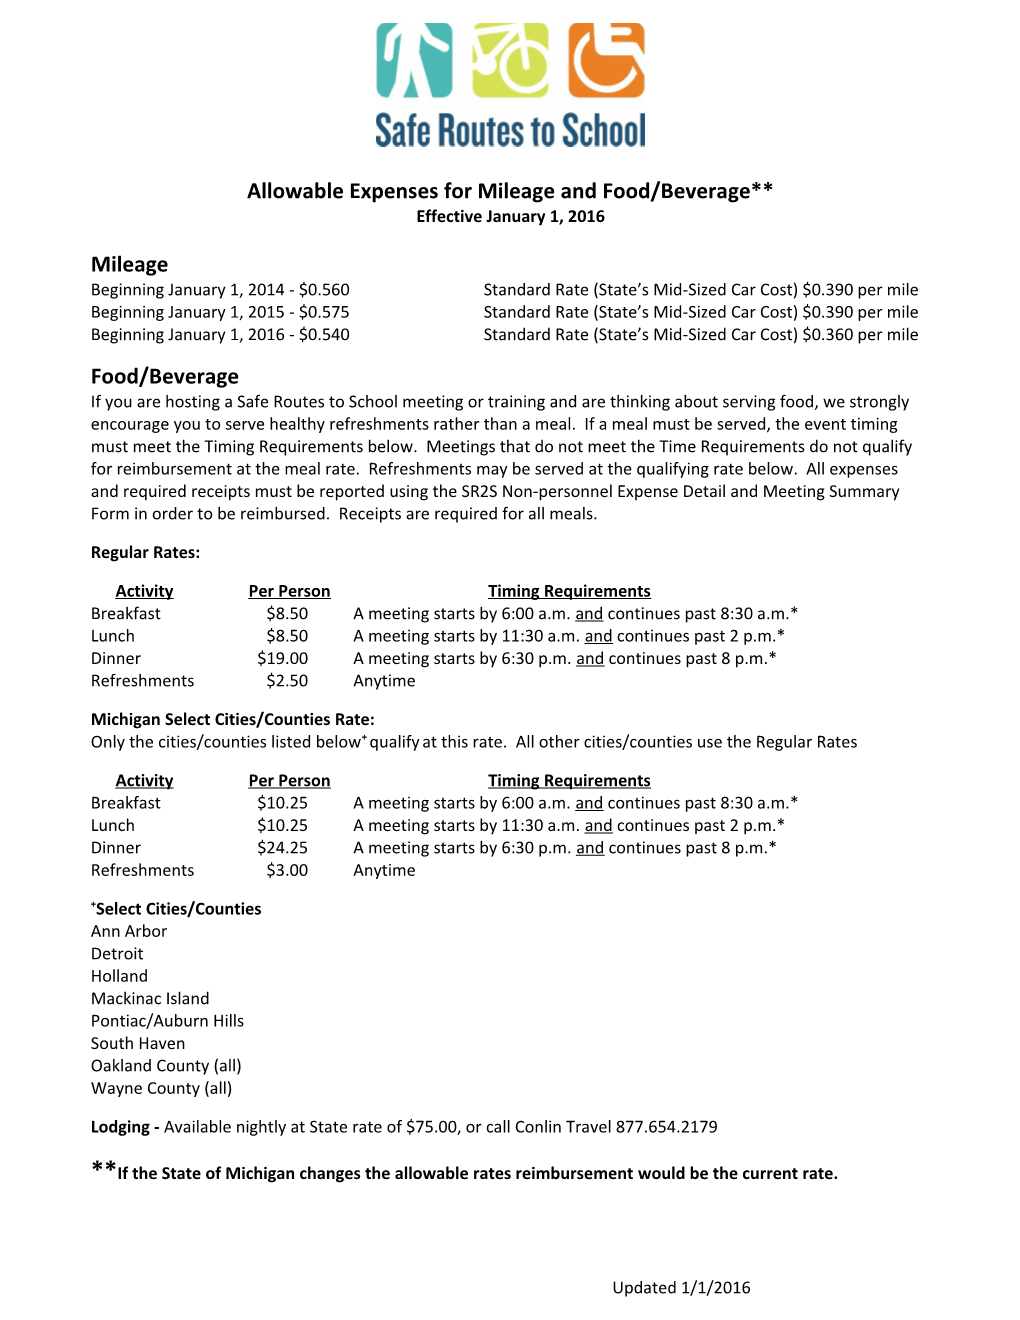 Allowable Expenses for Mileage and Food/Beverage